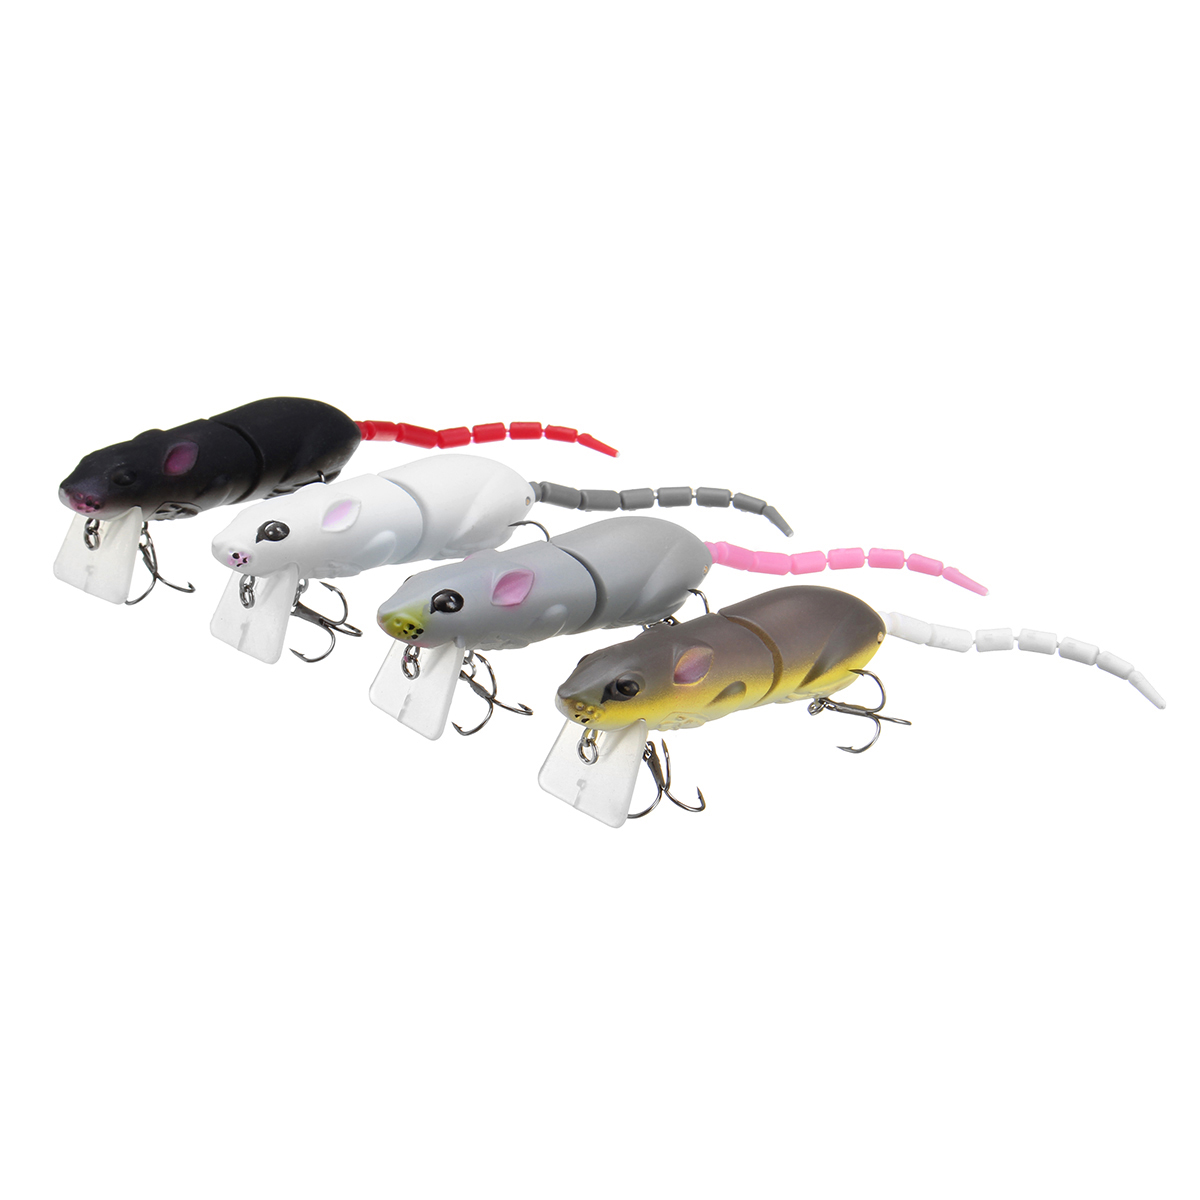 25cm-155g-Jointed-Rat-Fishing-Lure-Mouse-Floating-Crankbait-Sea-Topwater-3D-Eyes-Artificial-Baits-1354966-3